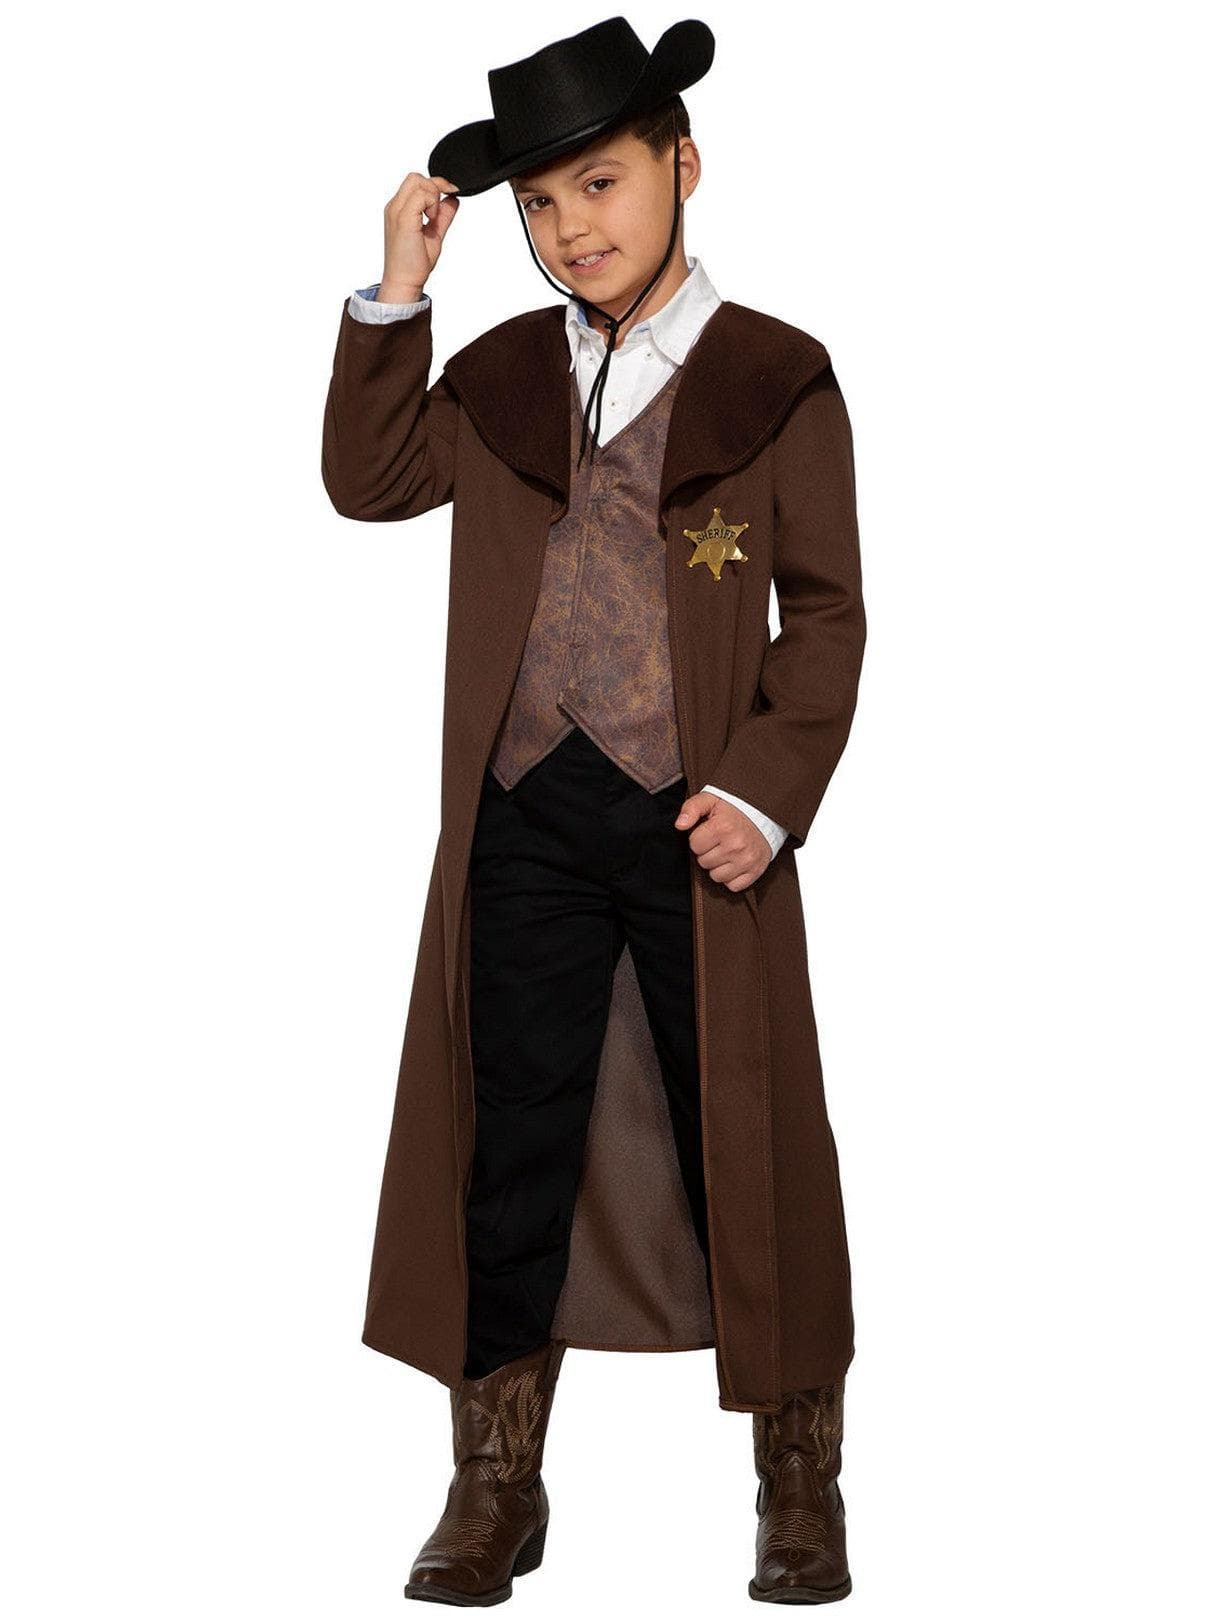 Kid's New Sheriff In Town Costume - costumes.com